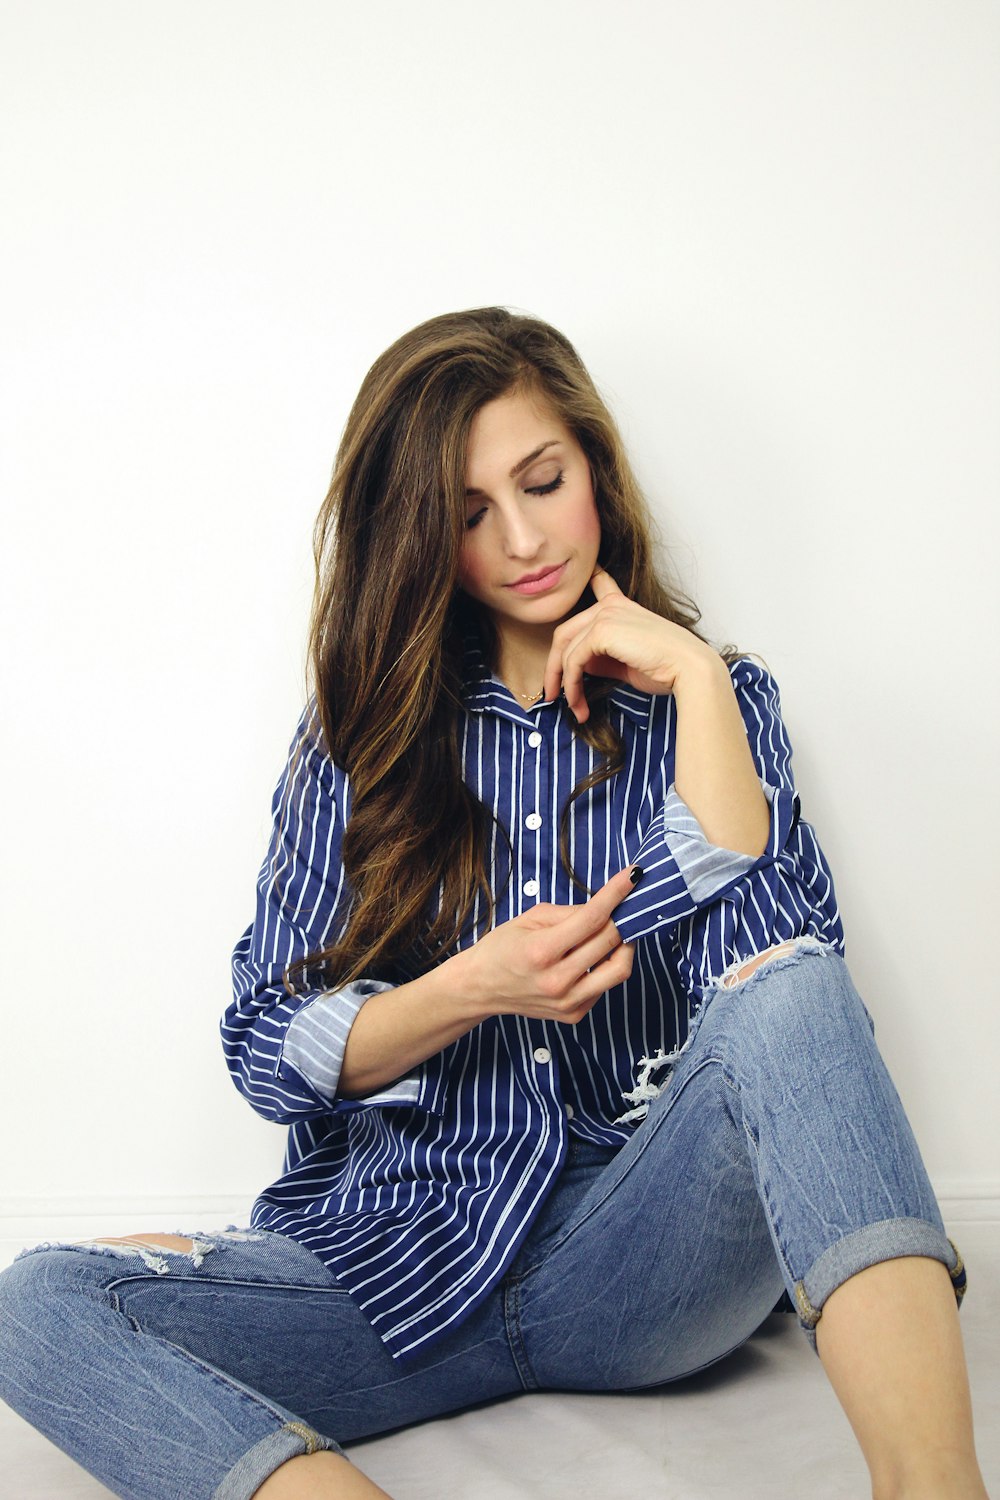 woman wearing blue and white striped dress shirt and blue denim jeans sitting on gray surface